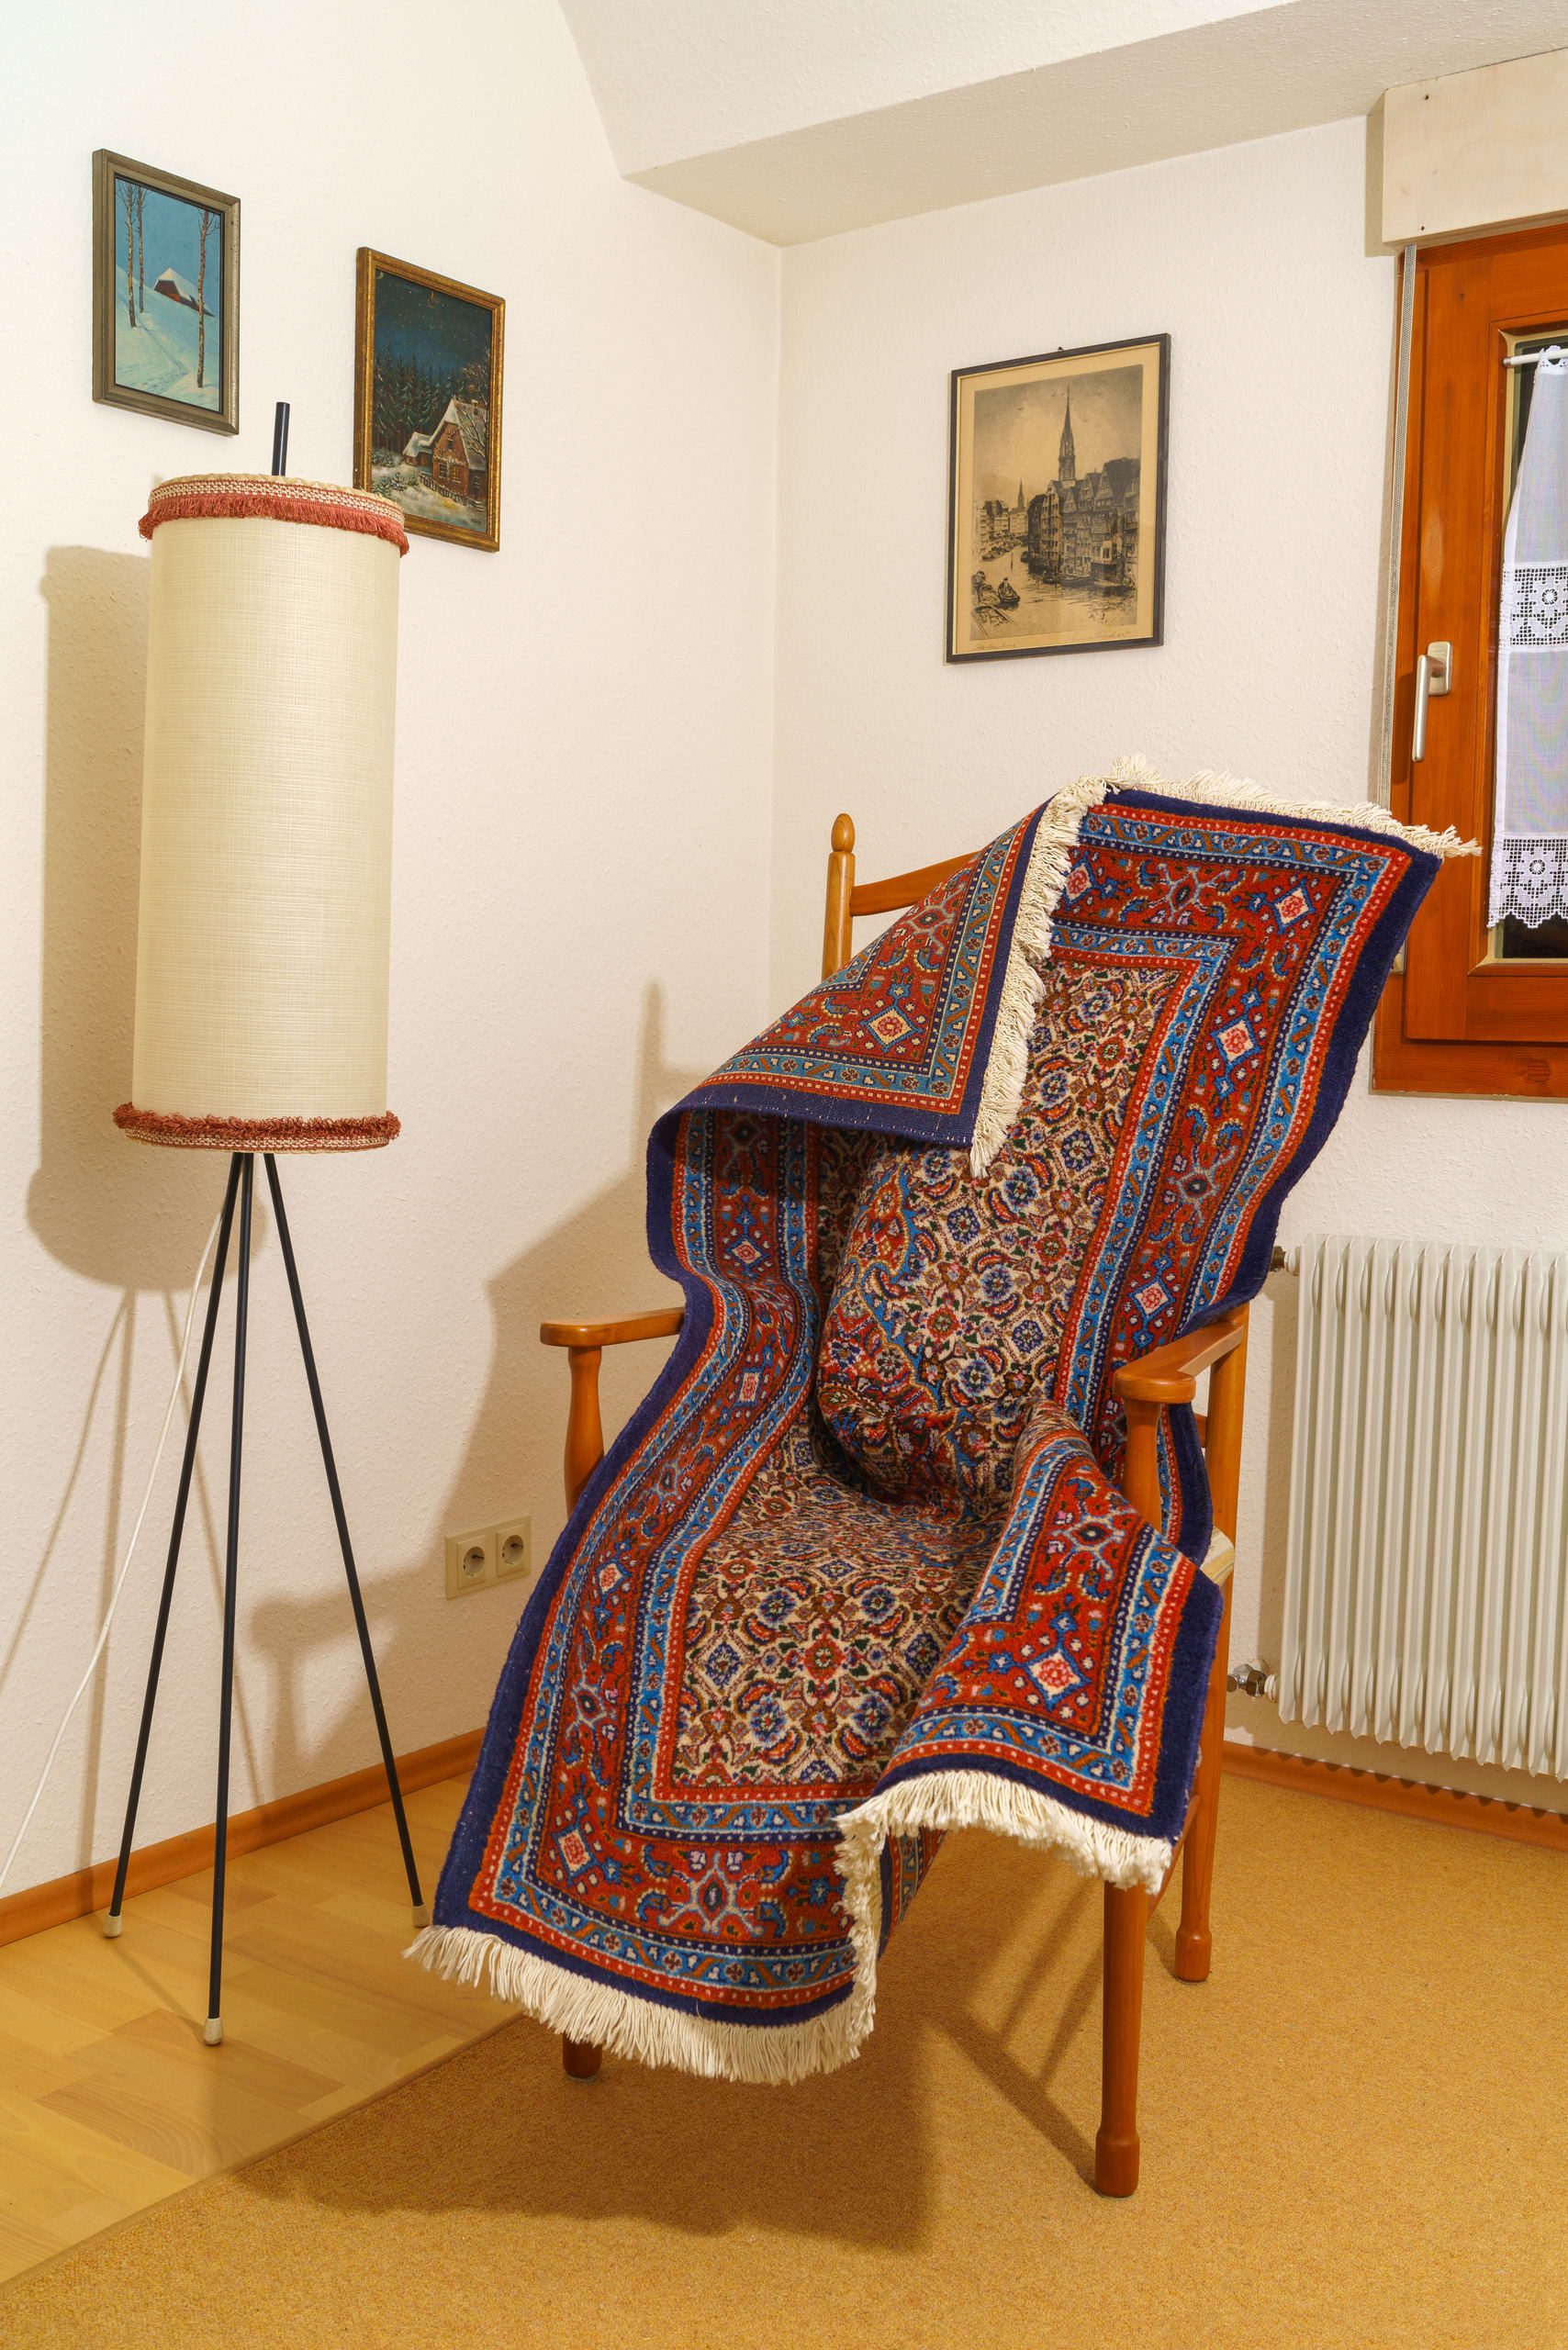 A rug positioned in a chair to look like a person.